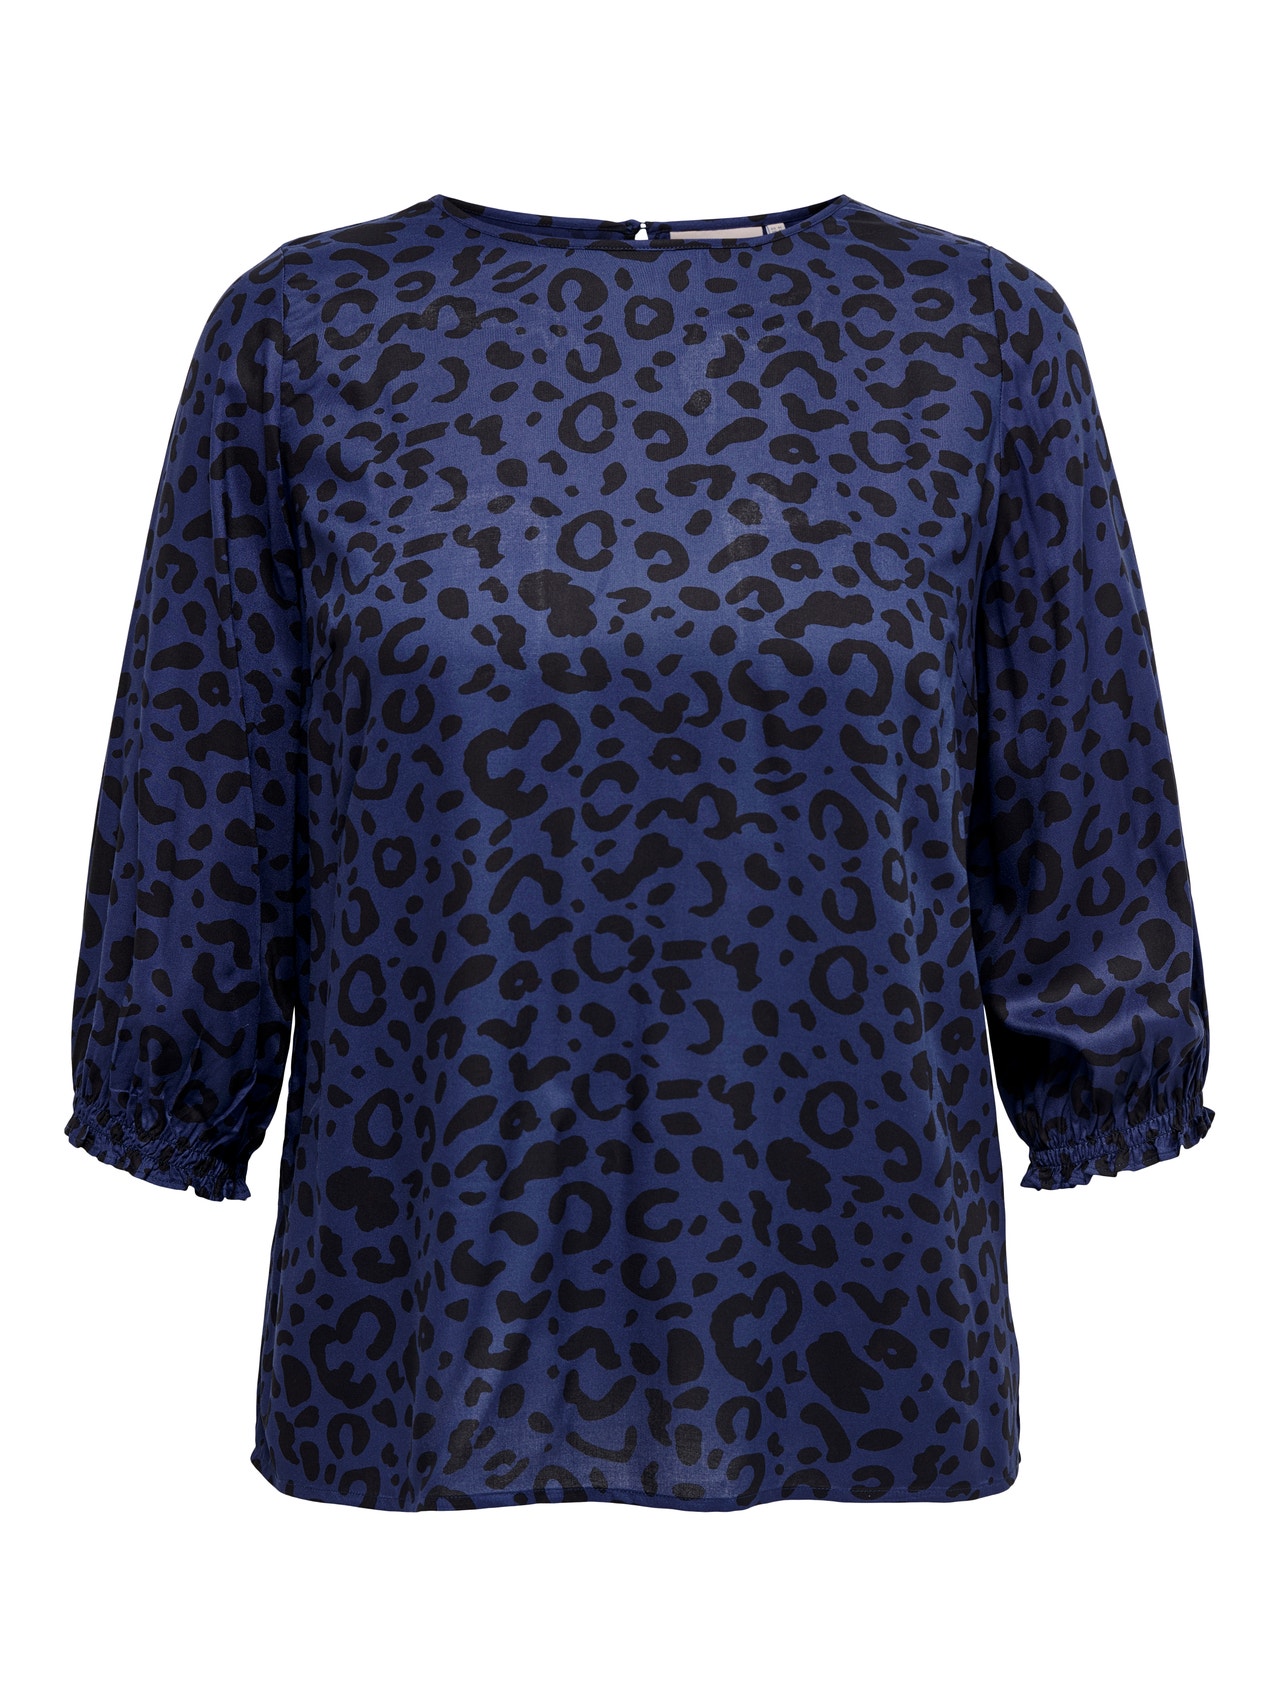 ONLY Curvy Patterned Top -Patriot Blue - 15285099